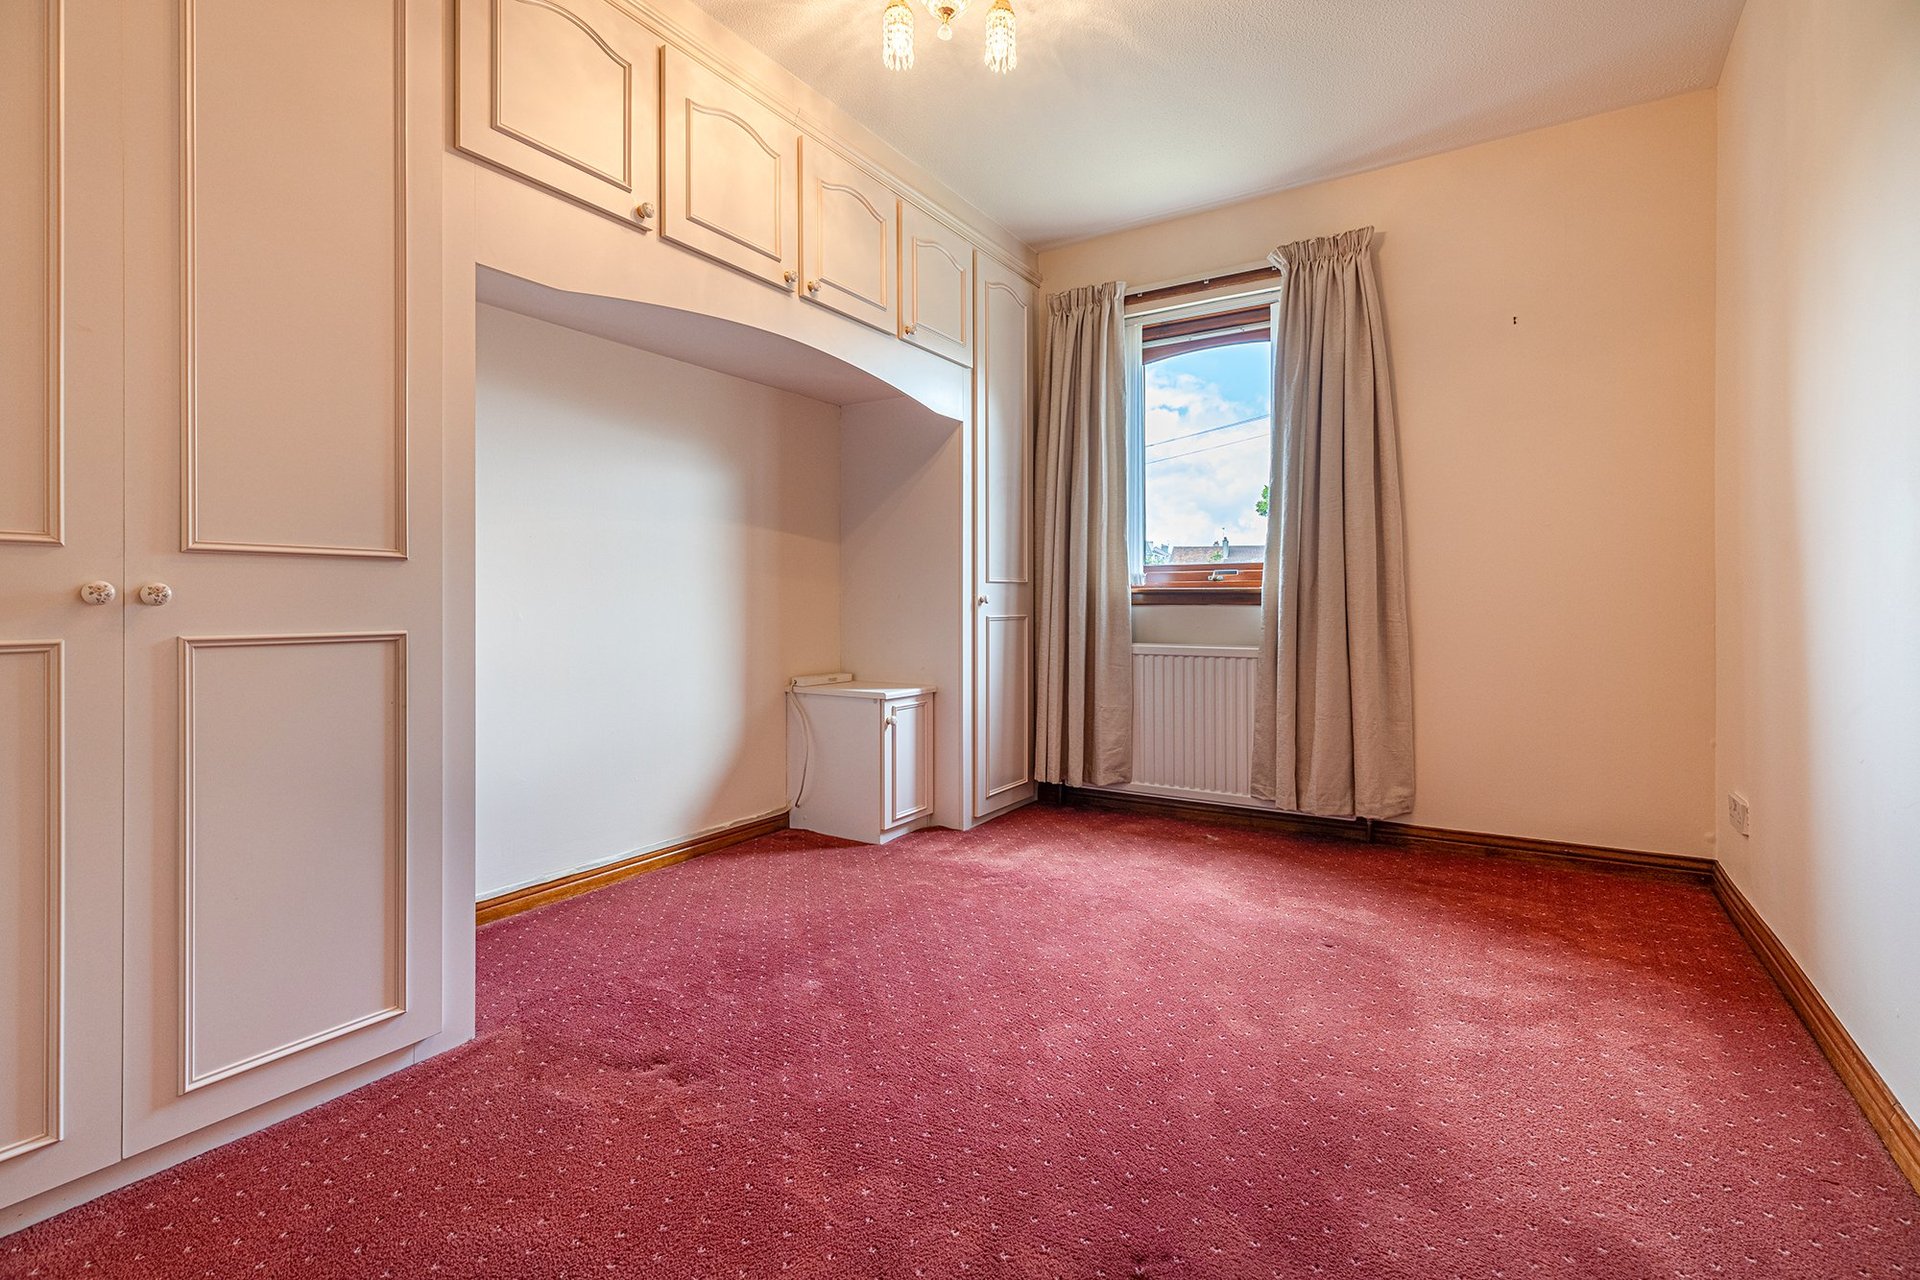 Flat 16, The Firs, 5 Millholm Road, Glasgow, Glasgow City, G44 3YB - Picture #8